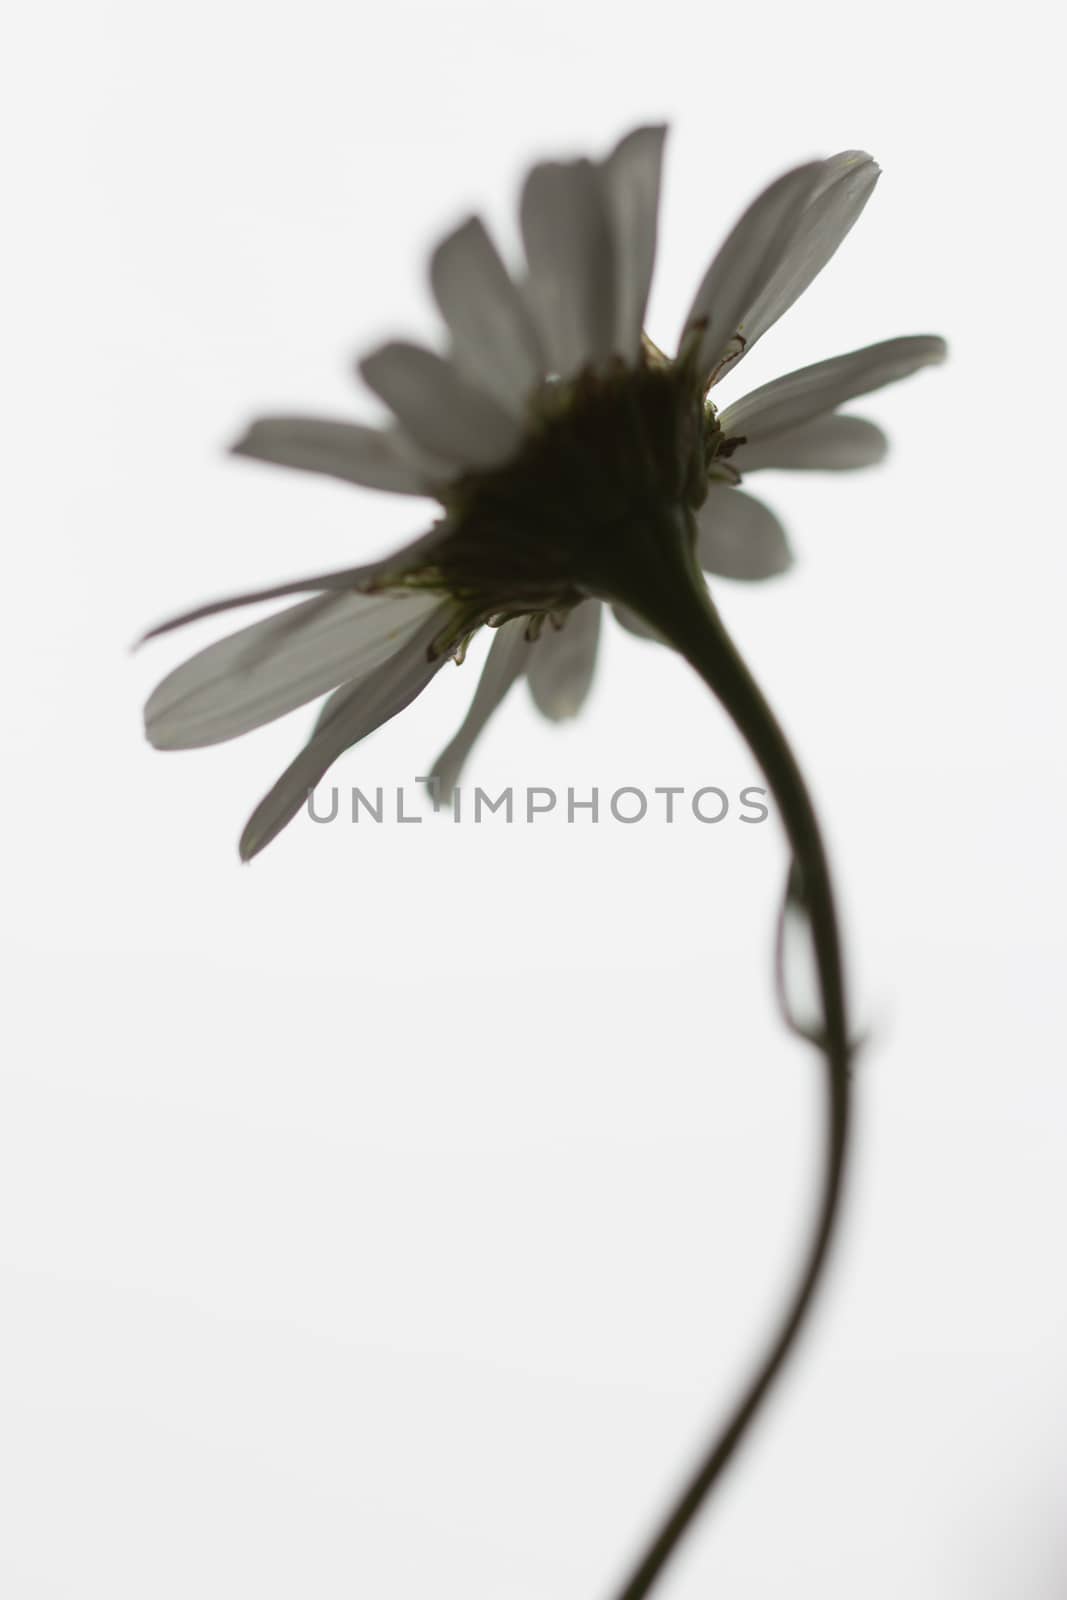 An isolated destressed white daisy with black stem on white background